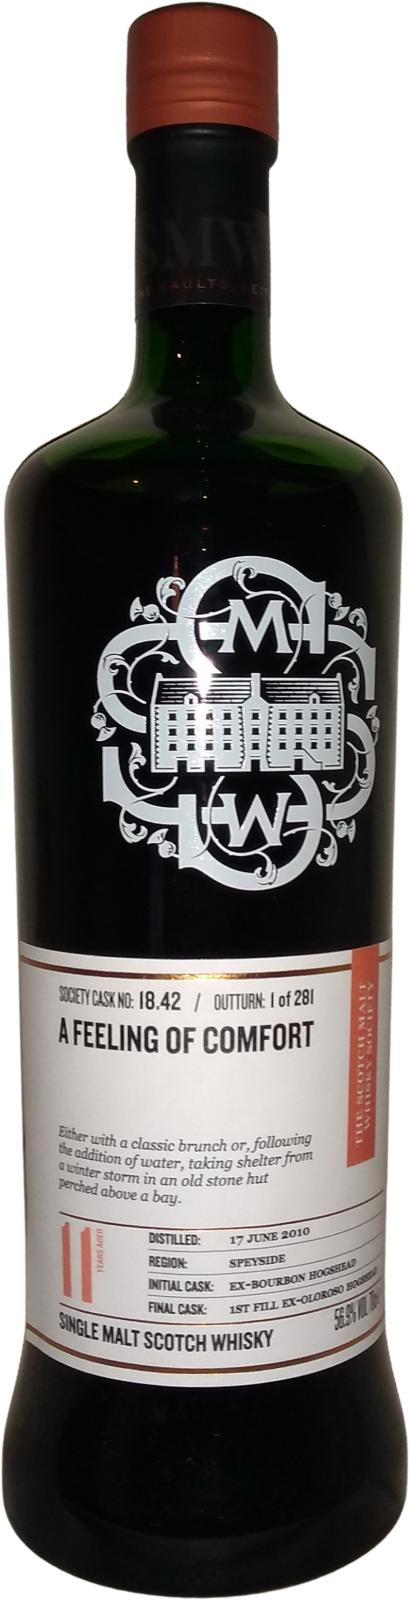 Inchgower 2010 SMWS 18.42